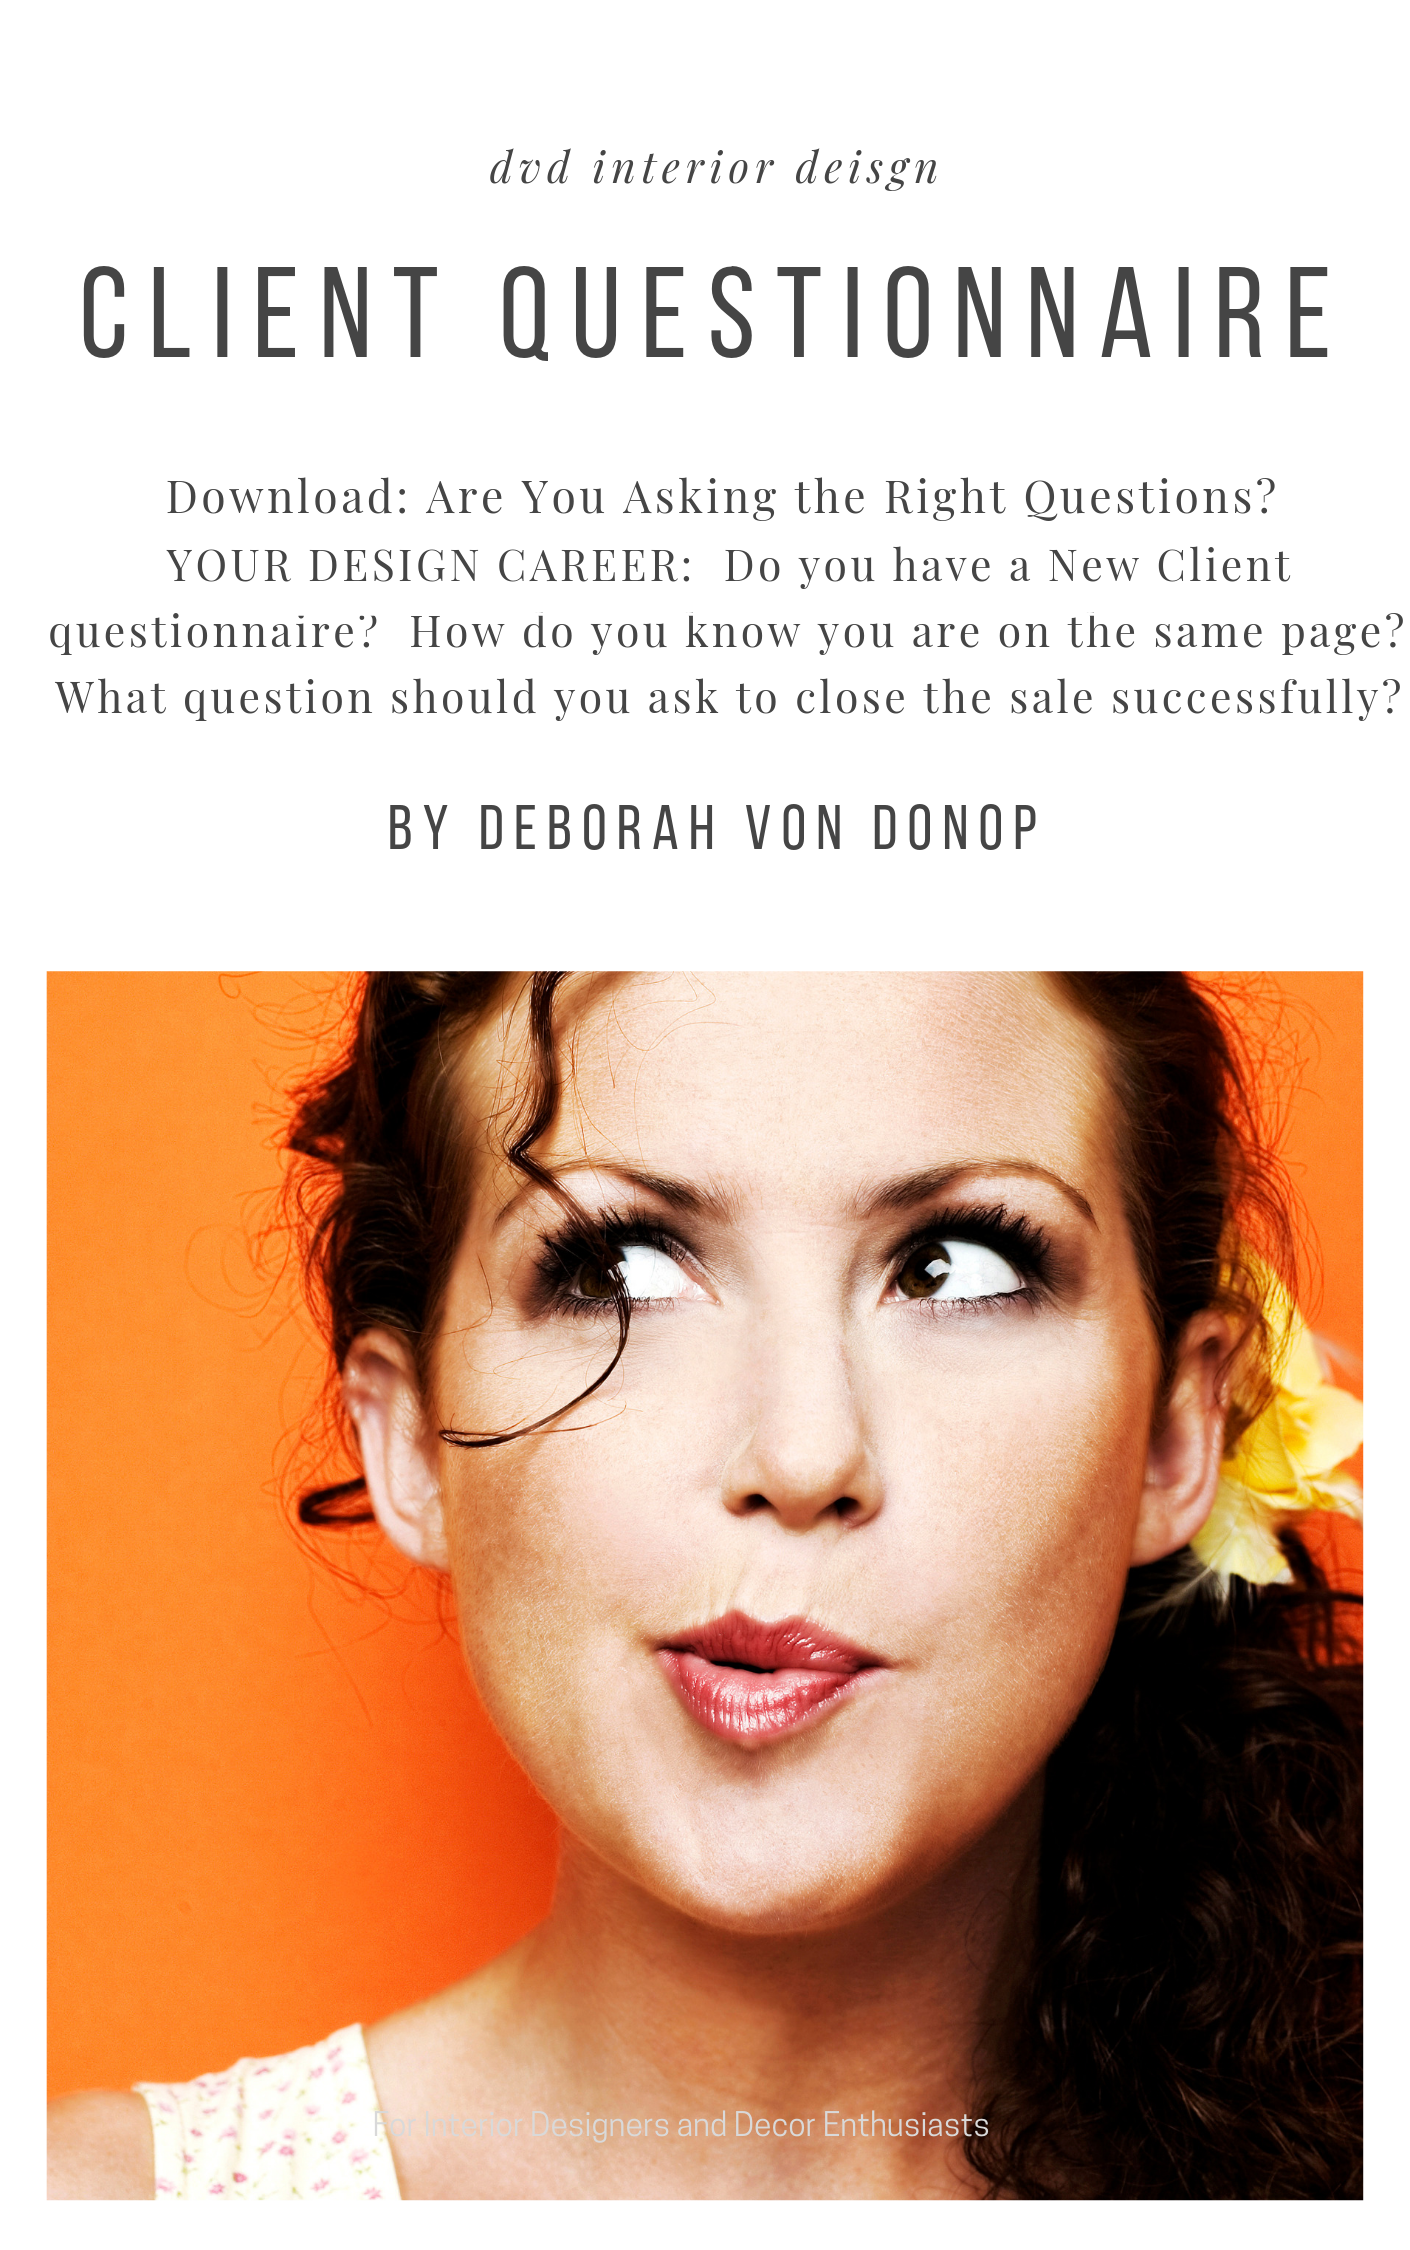 New Client Questionnaire Are You Asking The Right Questions Dvd Interior Design